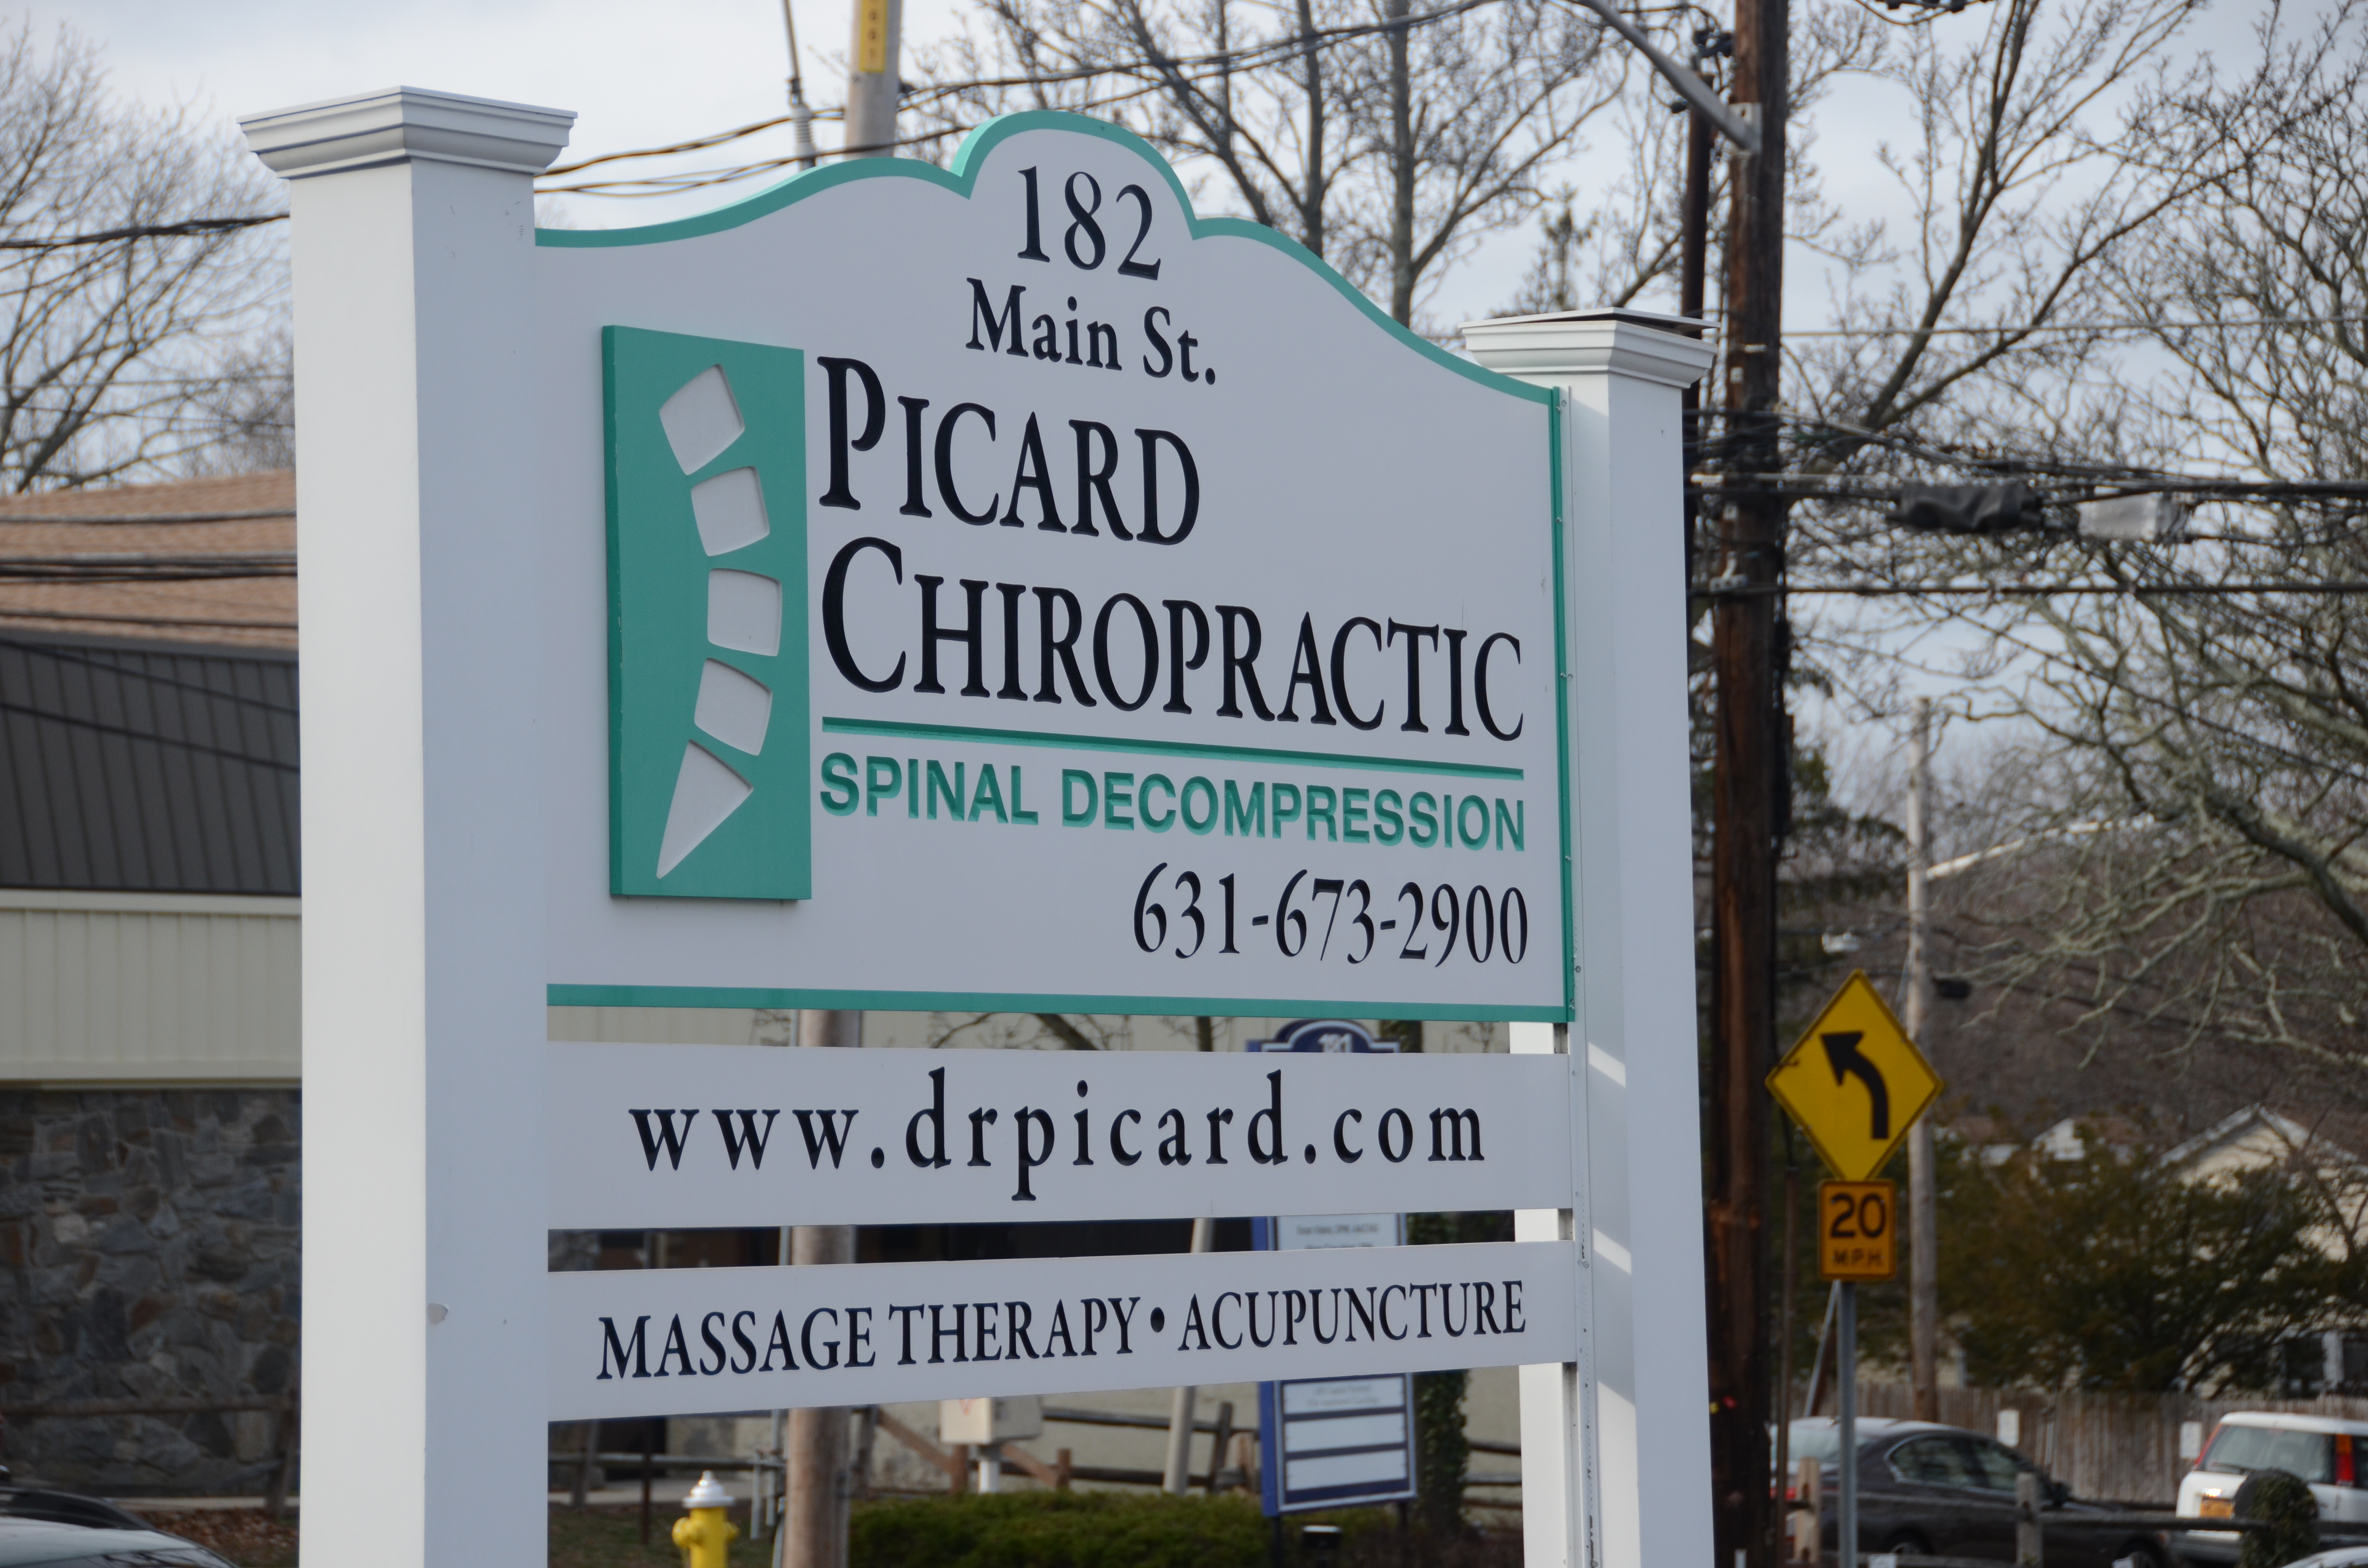 Picard Chiropractic Photo